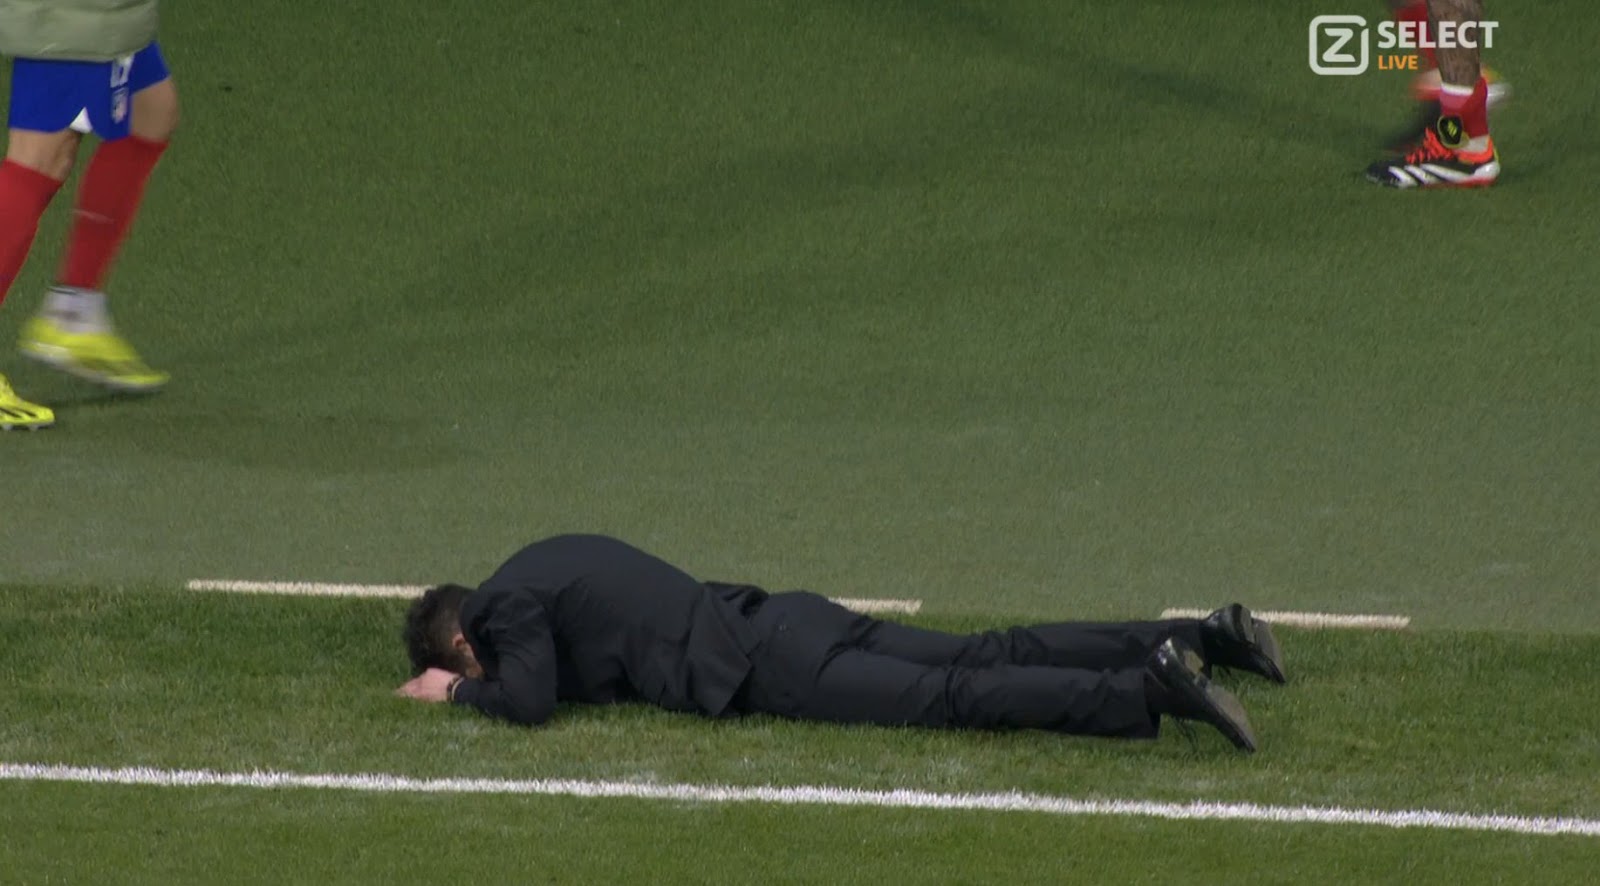 MEME PHOTO Diego Simeone face down while laying flat in